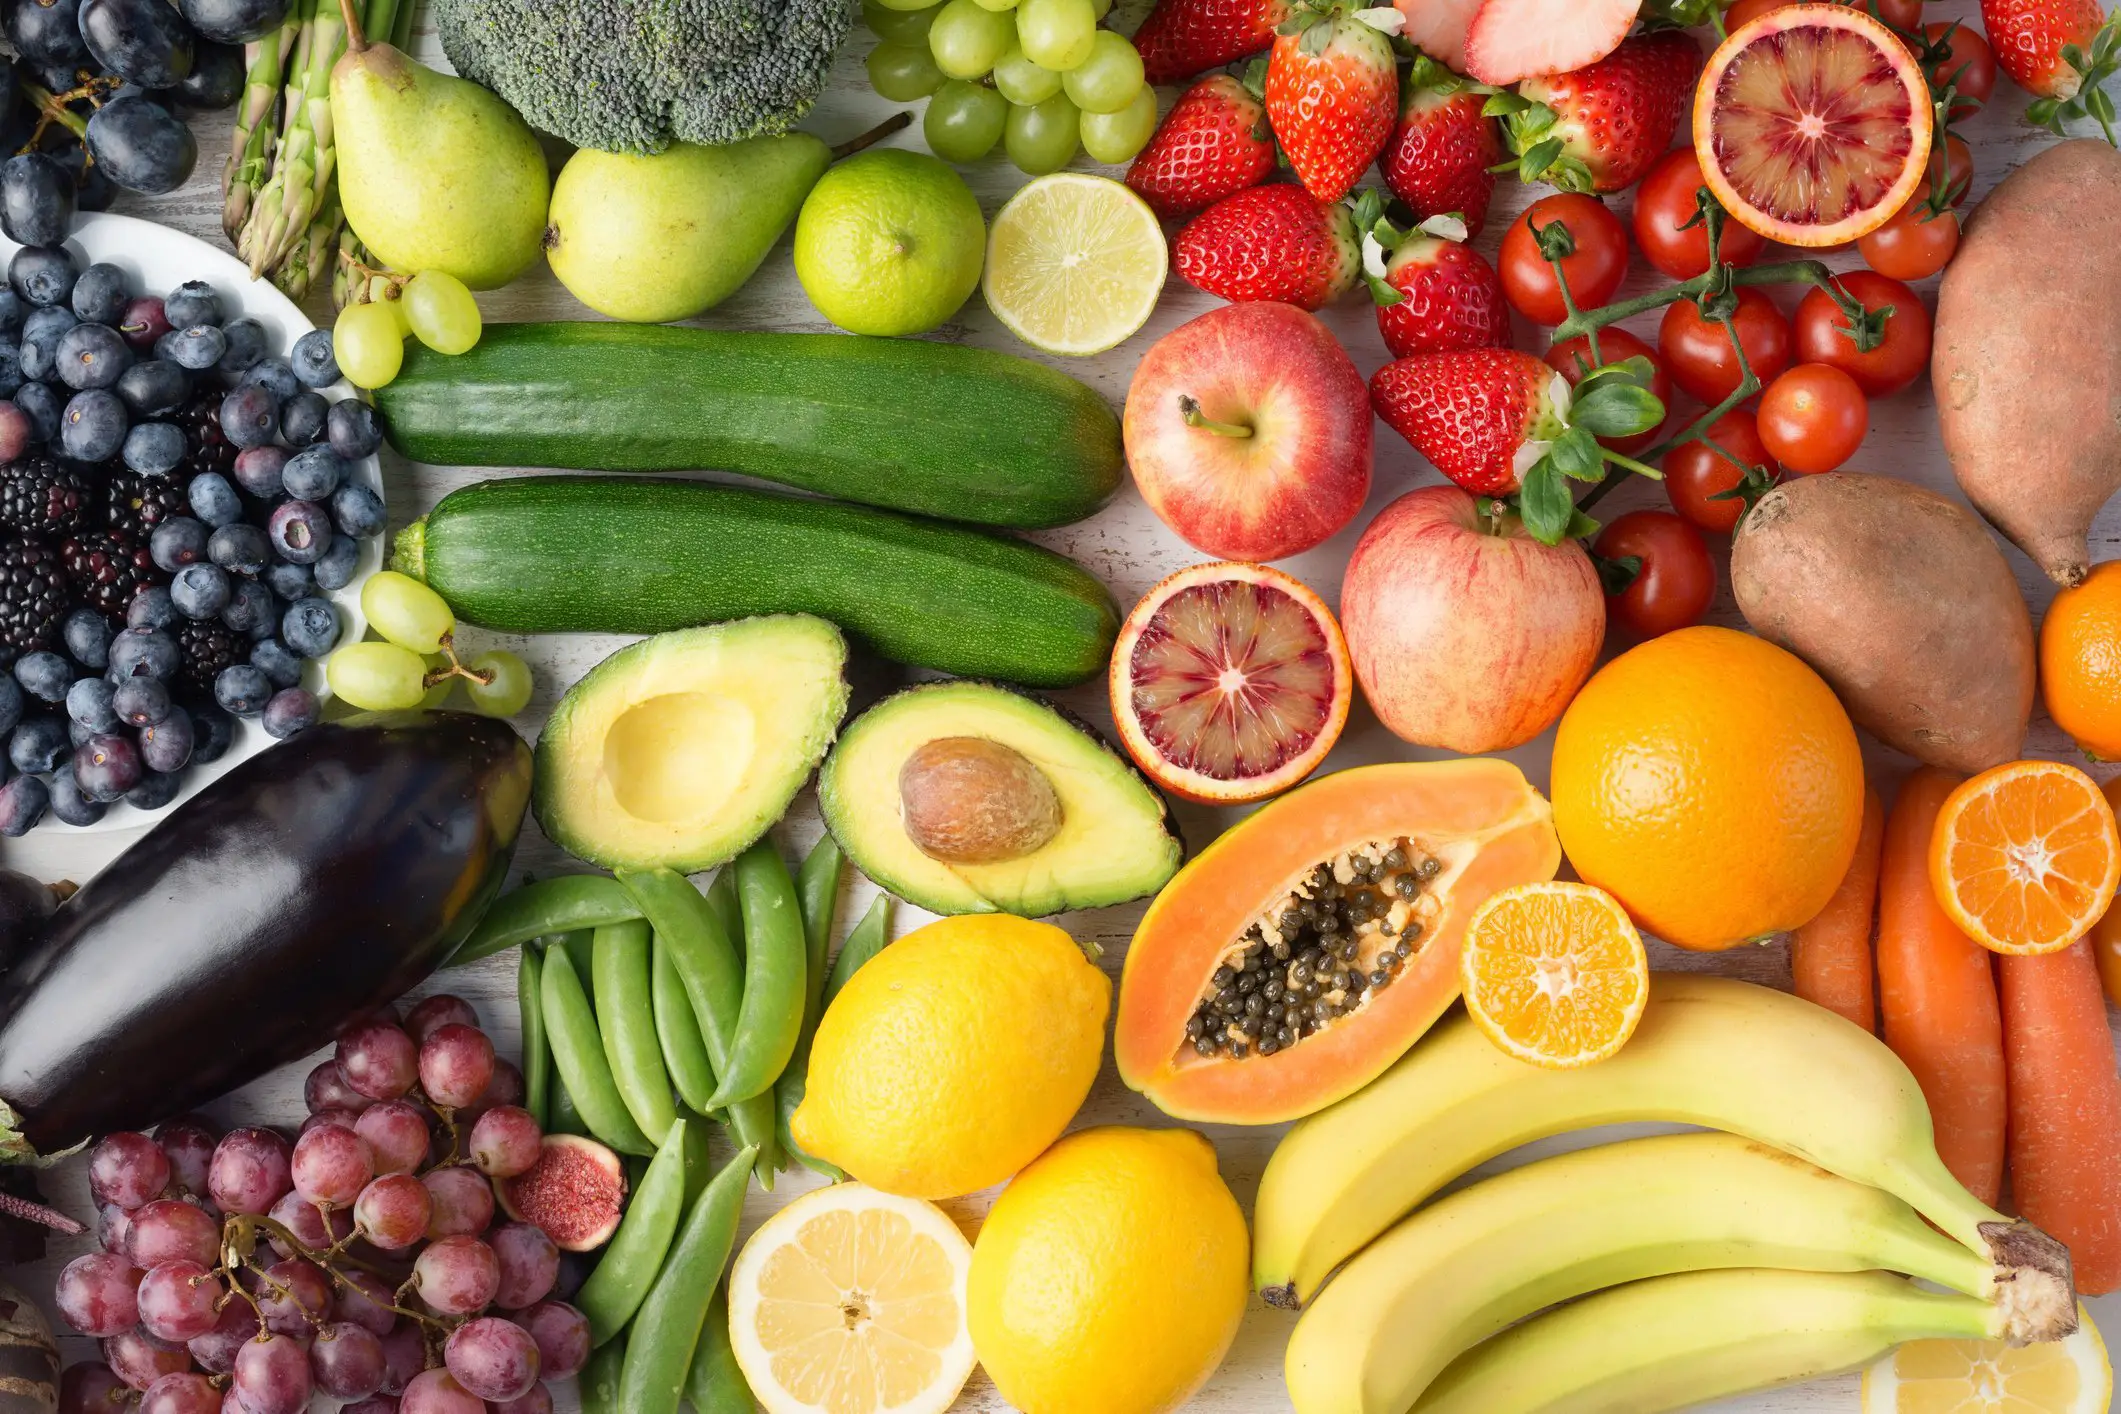 5 Easy Ways to Increase Fruits and Vegetables in Your Diet